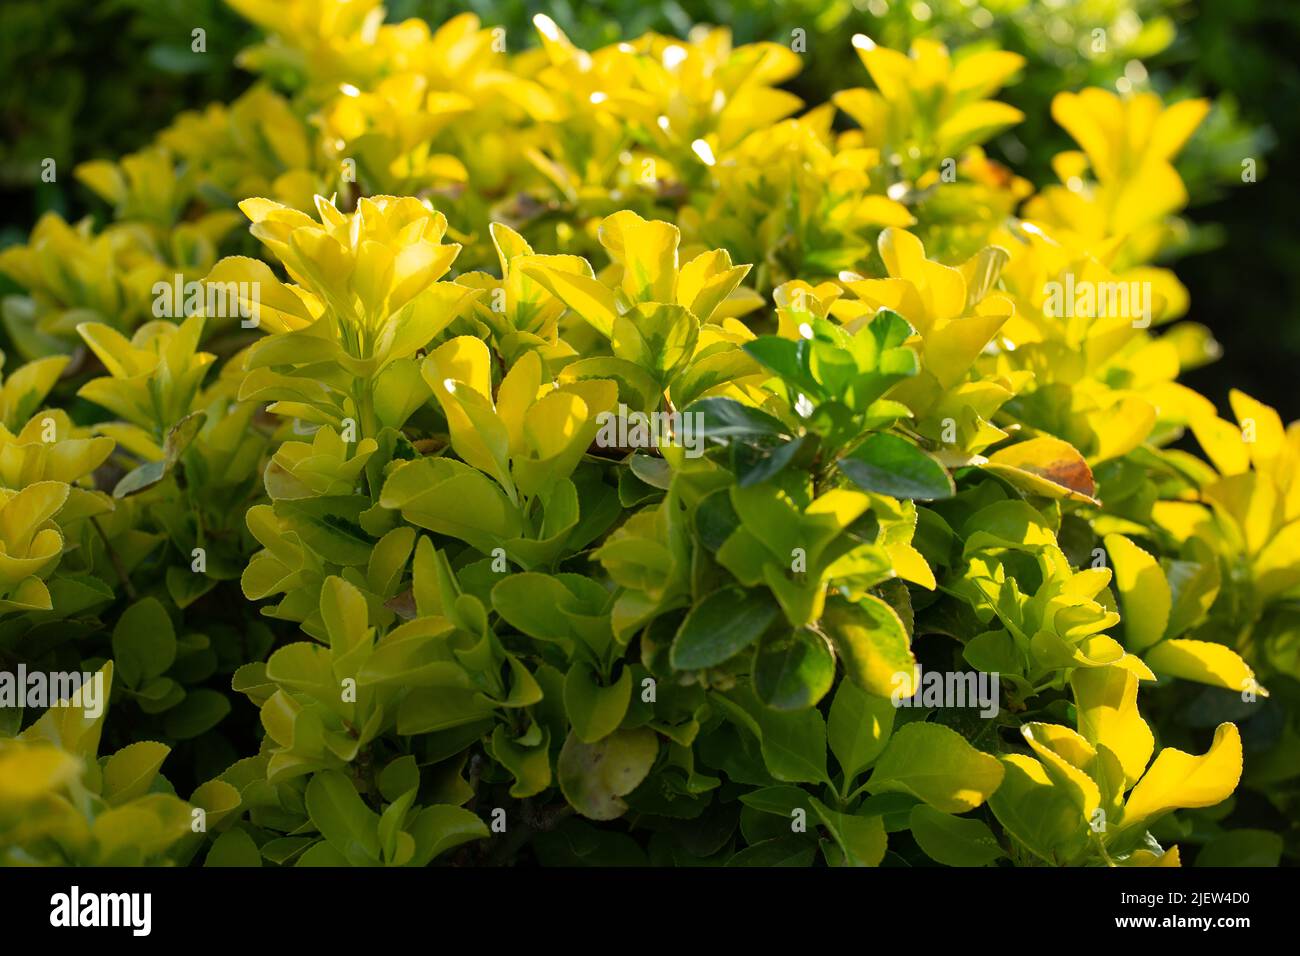 Green yellow leaves of Euonymus japonicus in the garden outdoor. Stock Photo